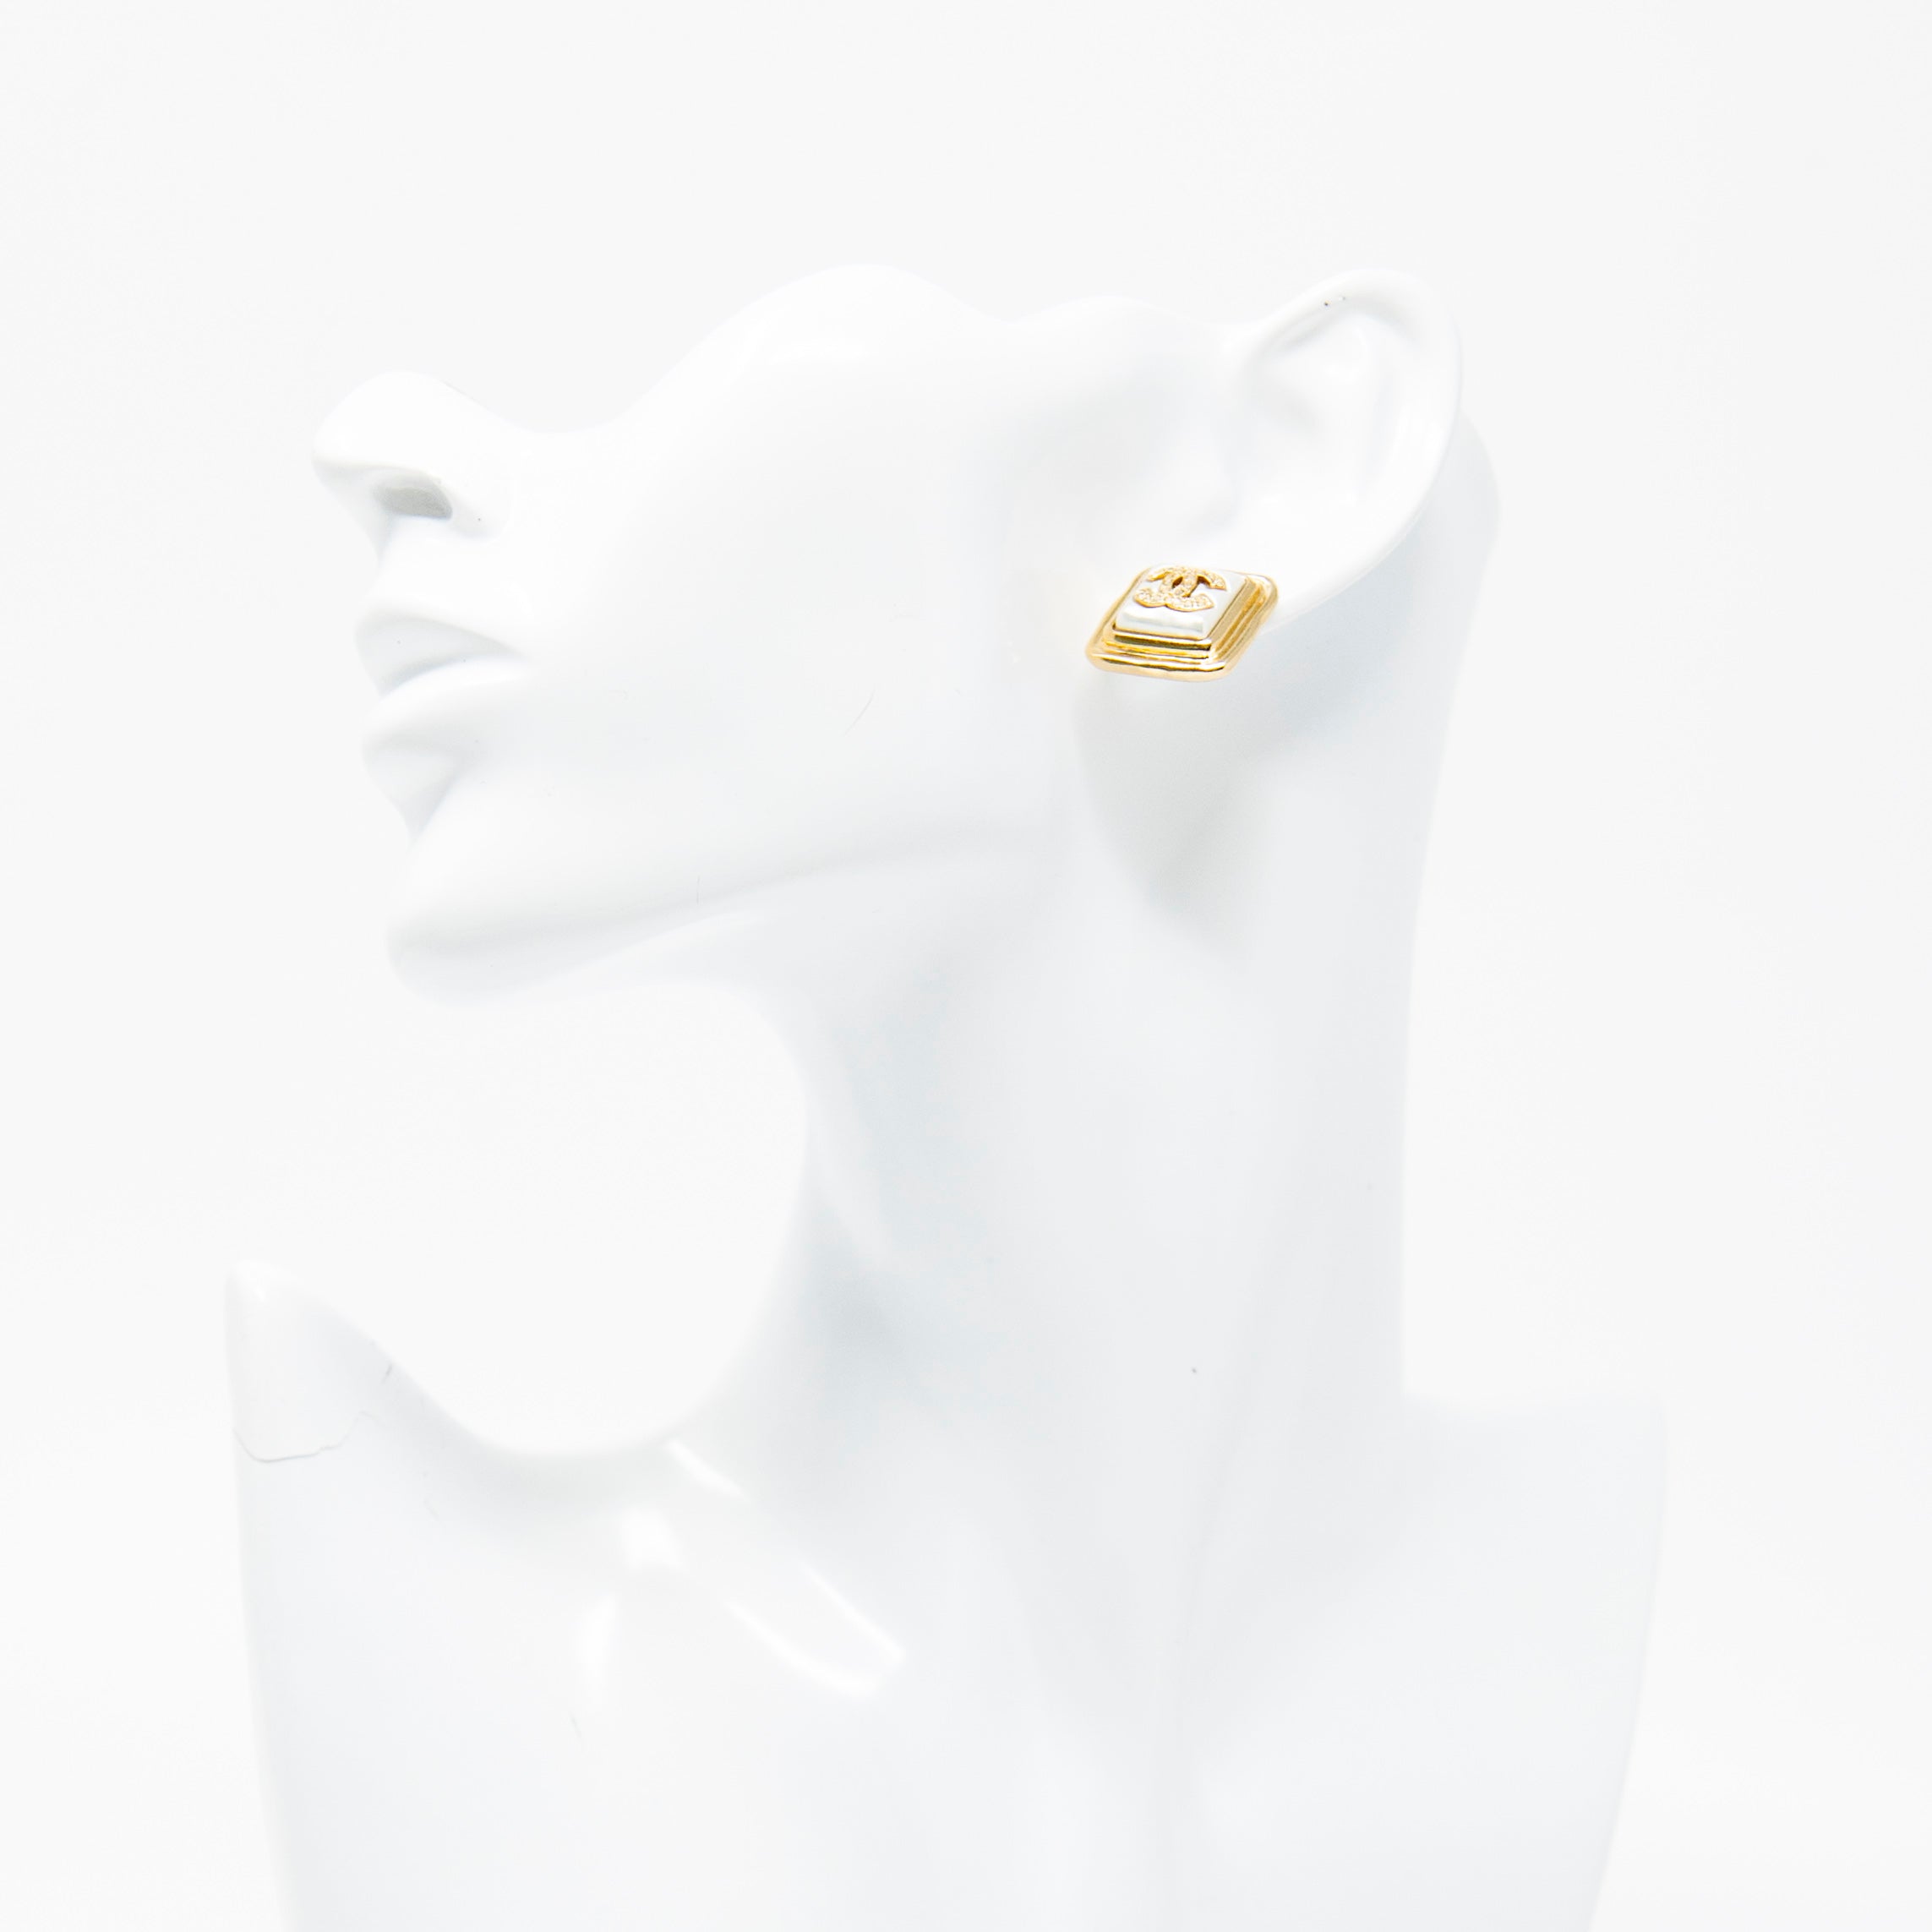 Chanel Square CC Earrings